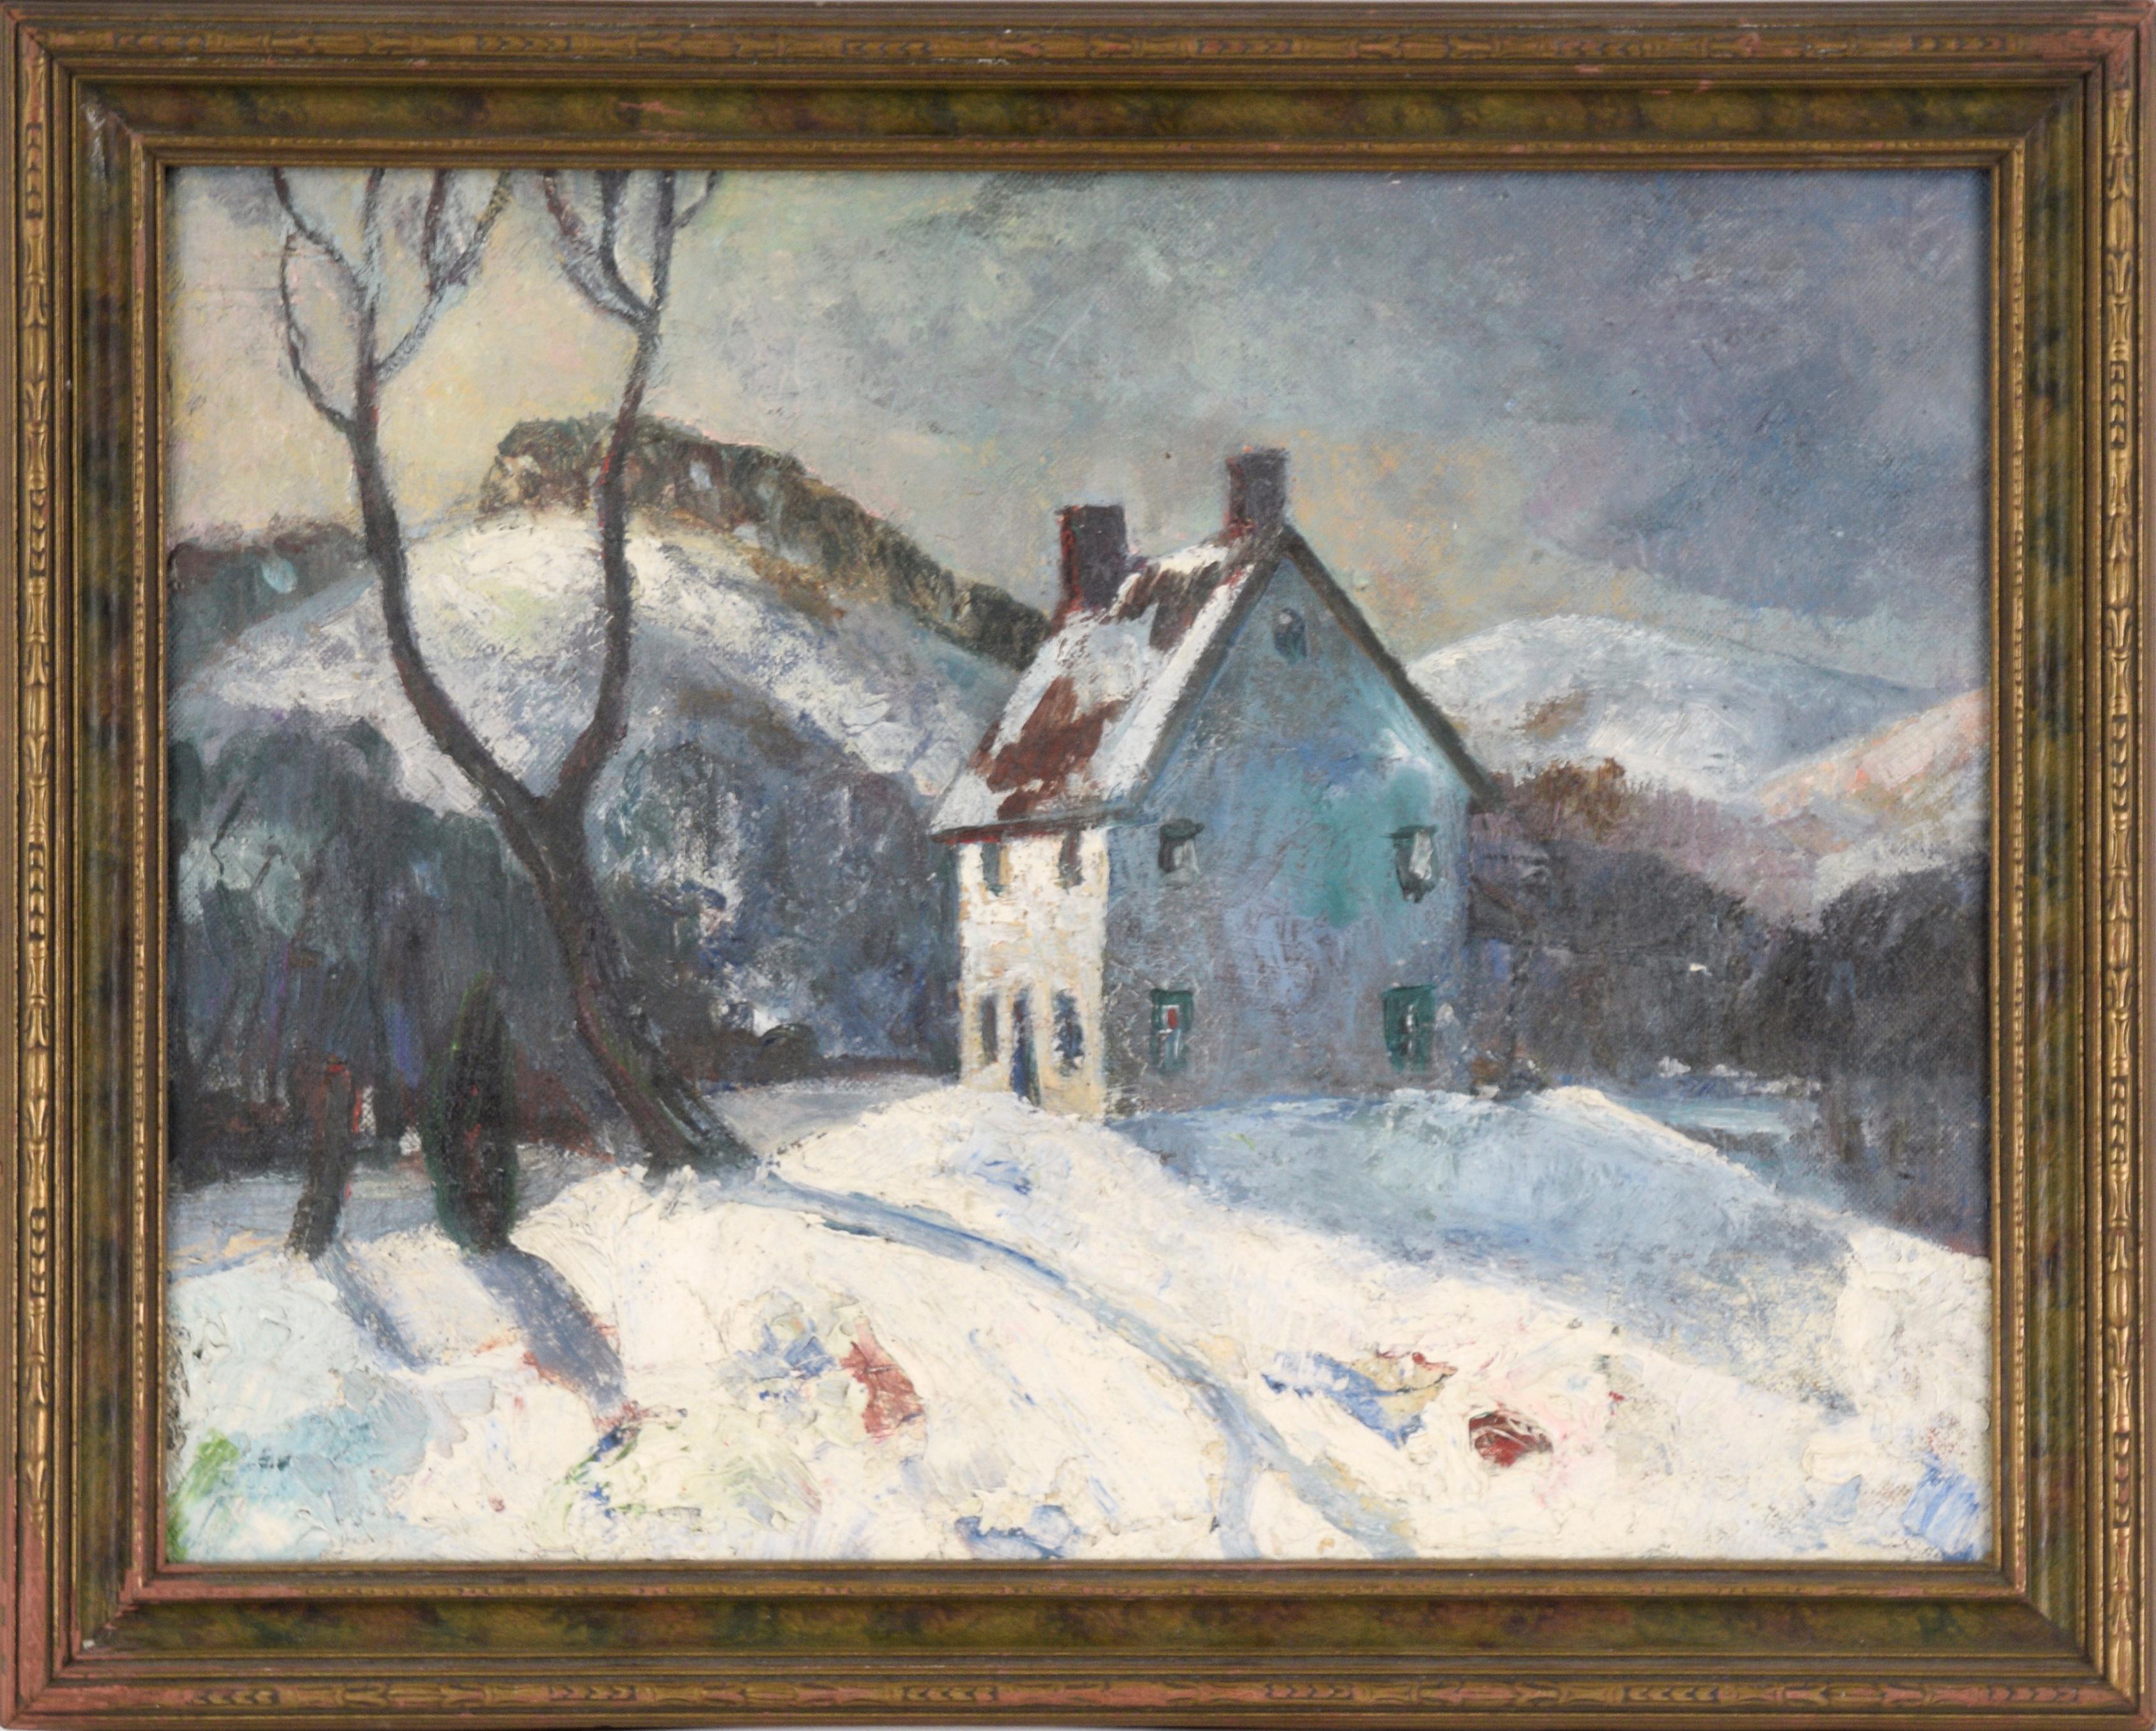 Horace Dearborn Shaw Landscape Painting - Melting Snow on the Cabin - Winter Landscape by Horace Shaw